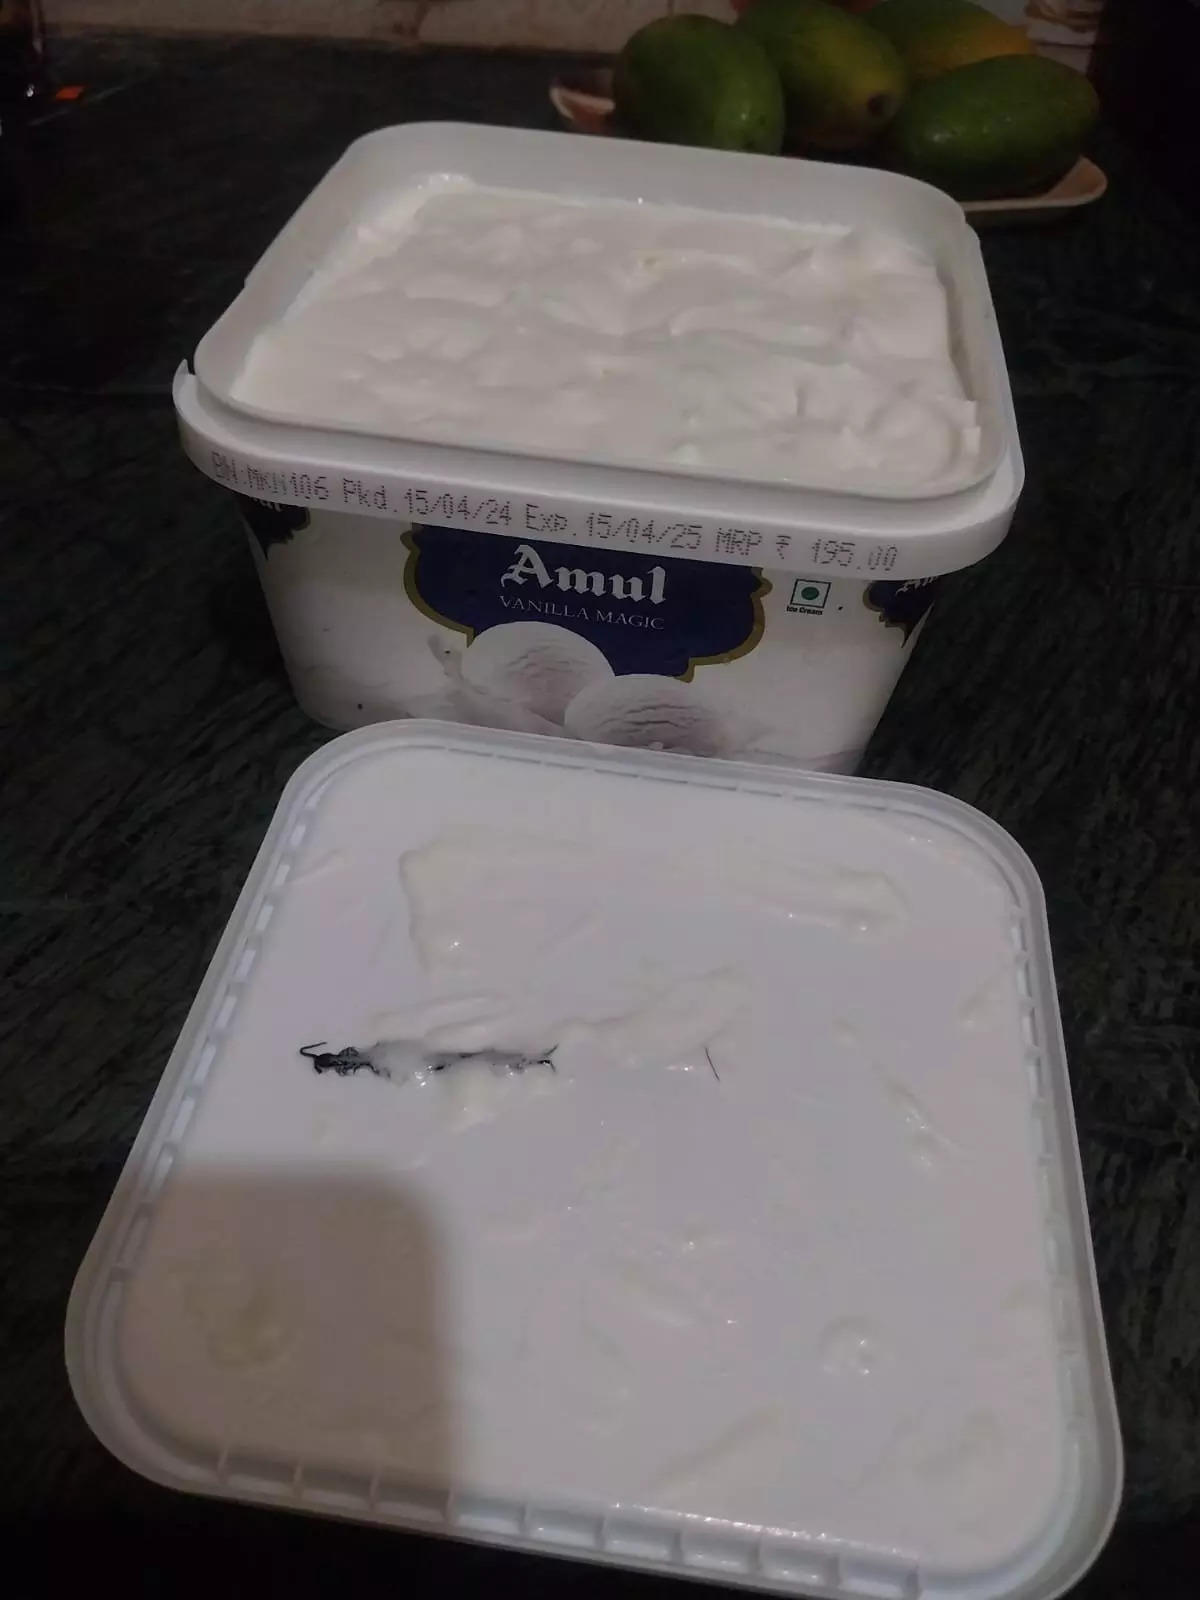 Centipede in ice-cream tub ordered online, claims Noida woman; authorities launch probe 